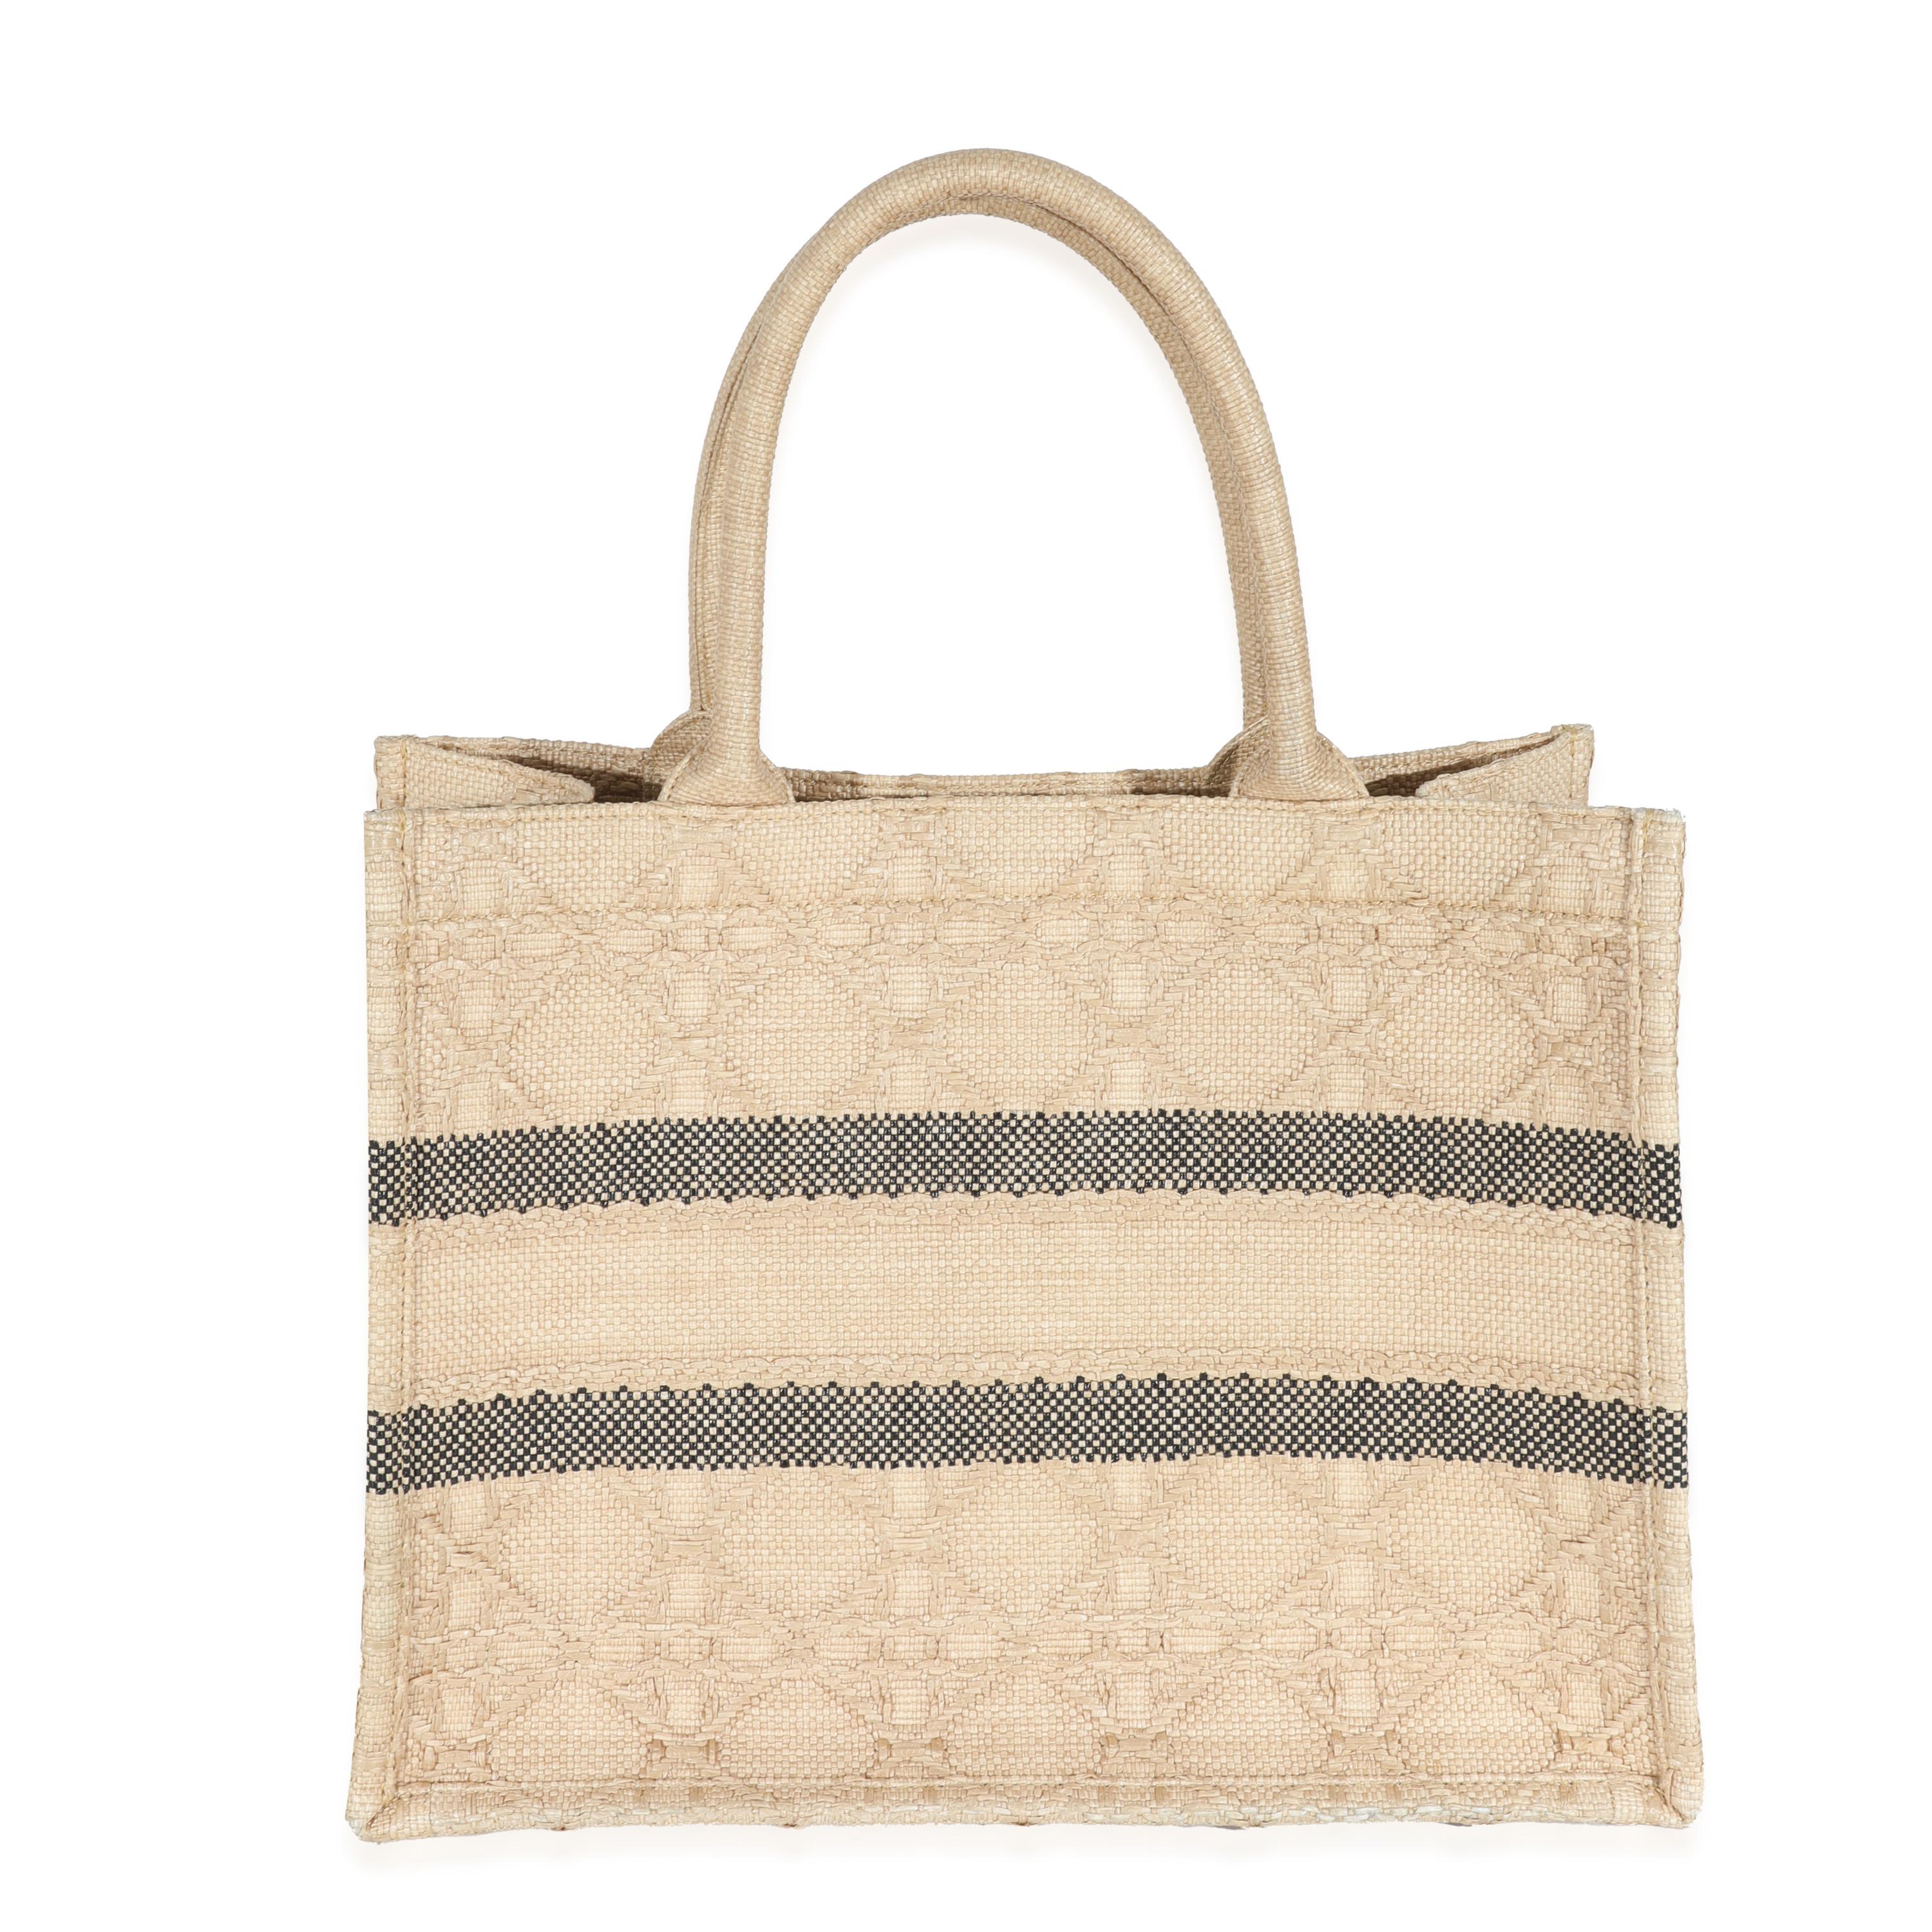 Listing Title: Christian Dior Natural Cannage Raffia Medium Book Tote
SKU: 130136
MSRP: 3700.00
Condition: Pre-owned 
Condition Description: The Dior Book tote combines practicality with impeccable style. Embroidered throughout for a look